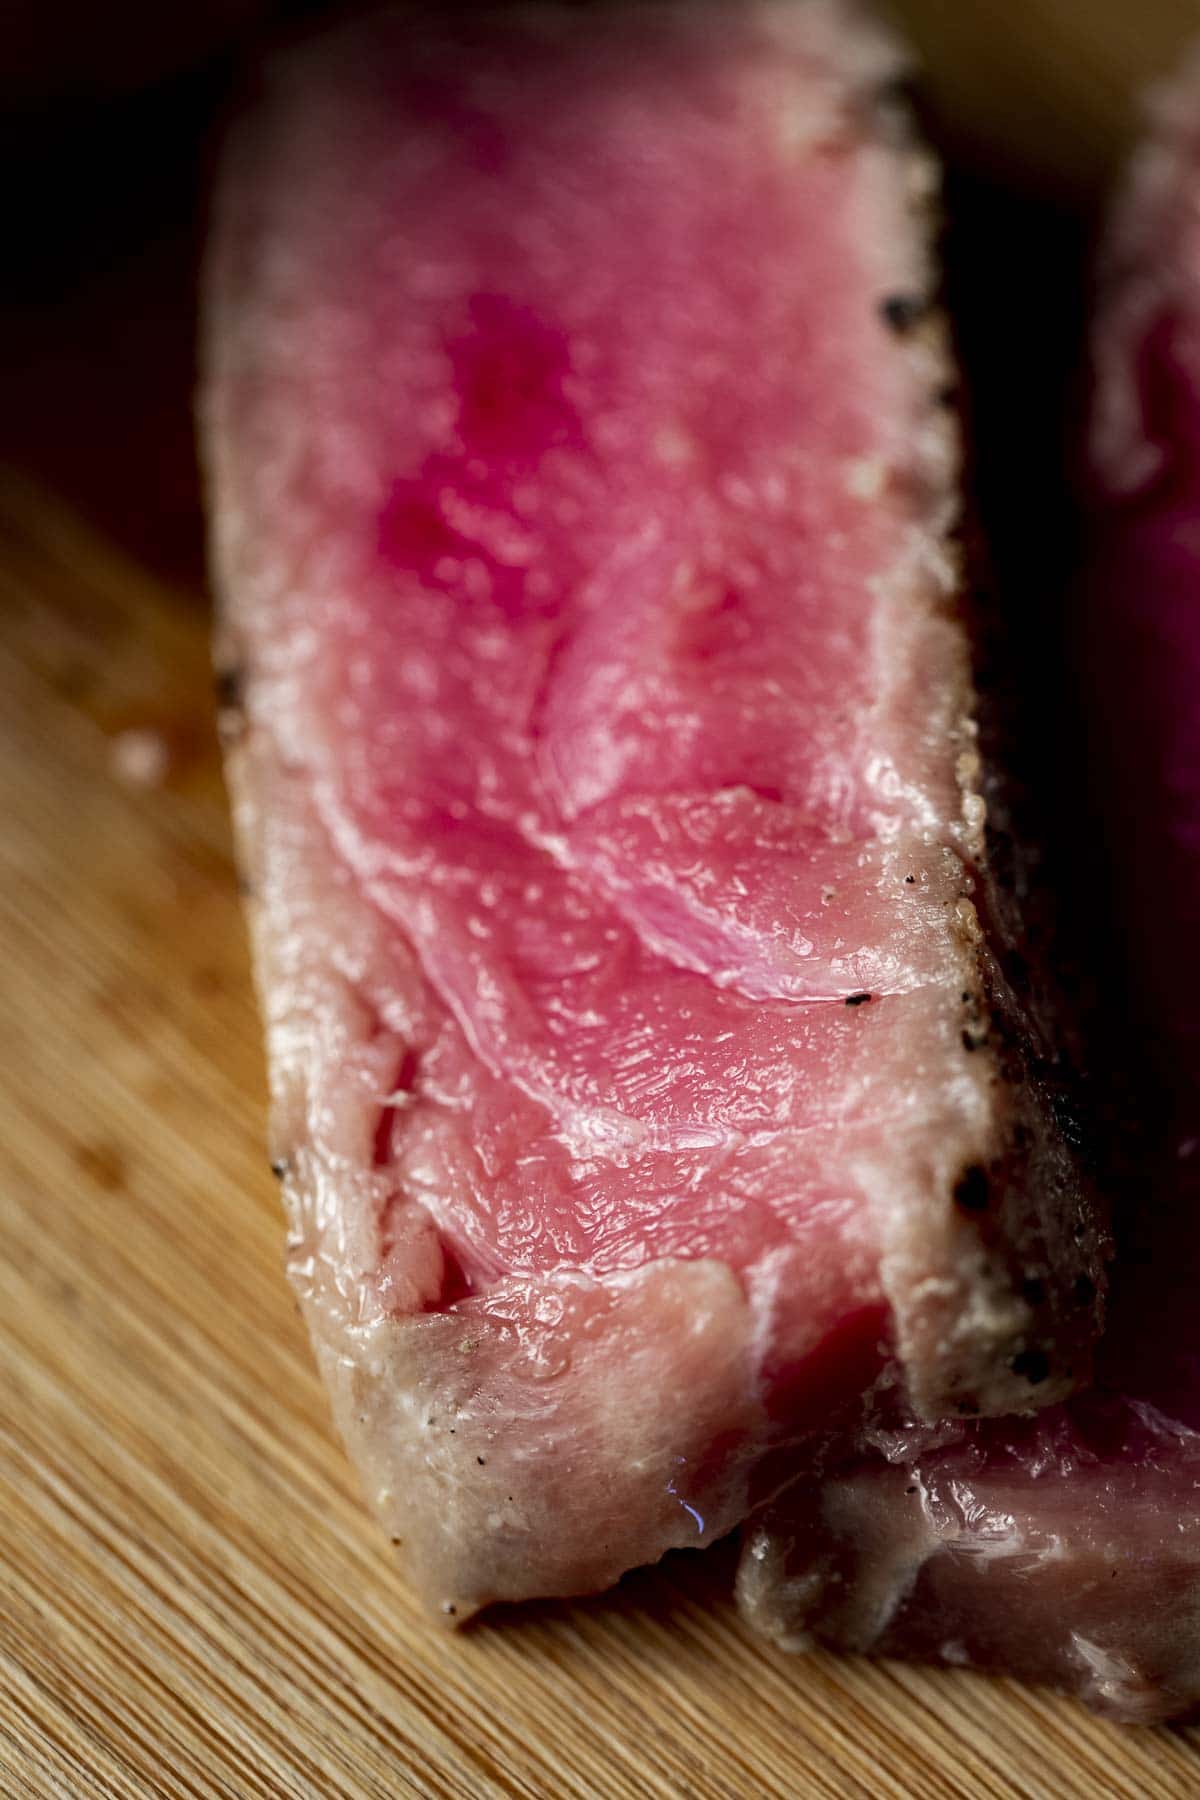 Close up view of a slice of tuna showing the rare, pink middle and outer crust.